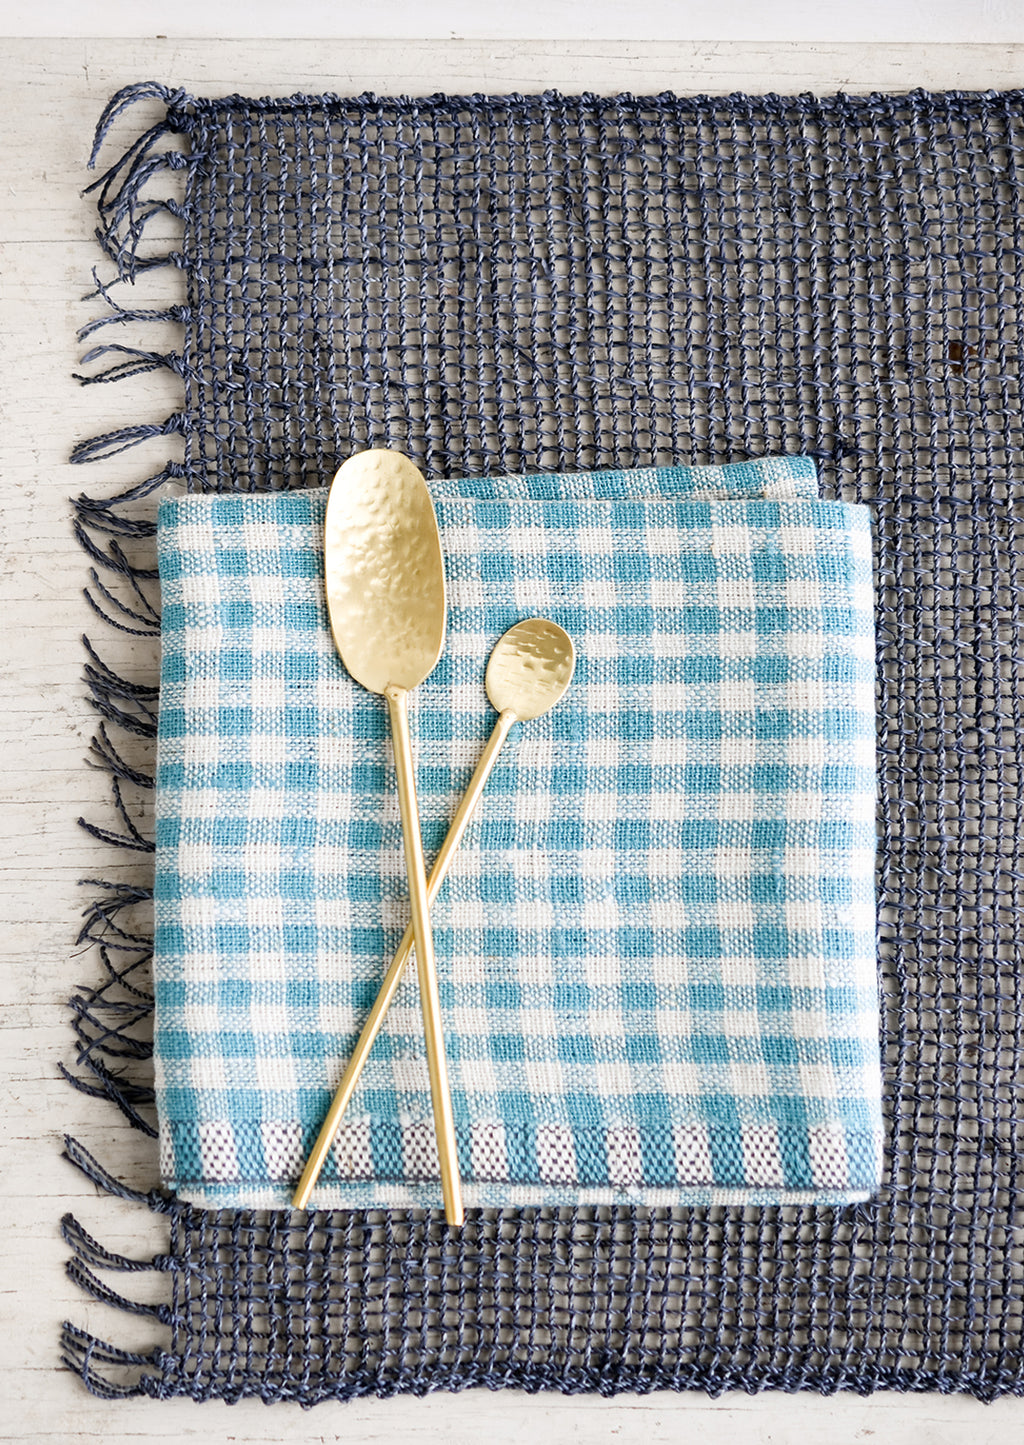 1: A blue-grey woven straw placemat with gingham napkin and gold spoons.